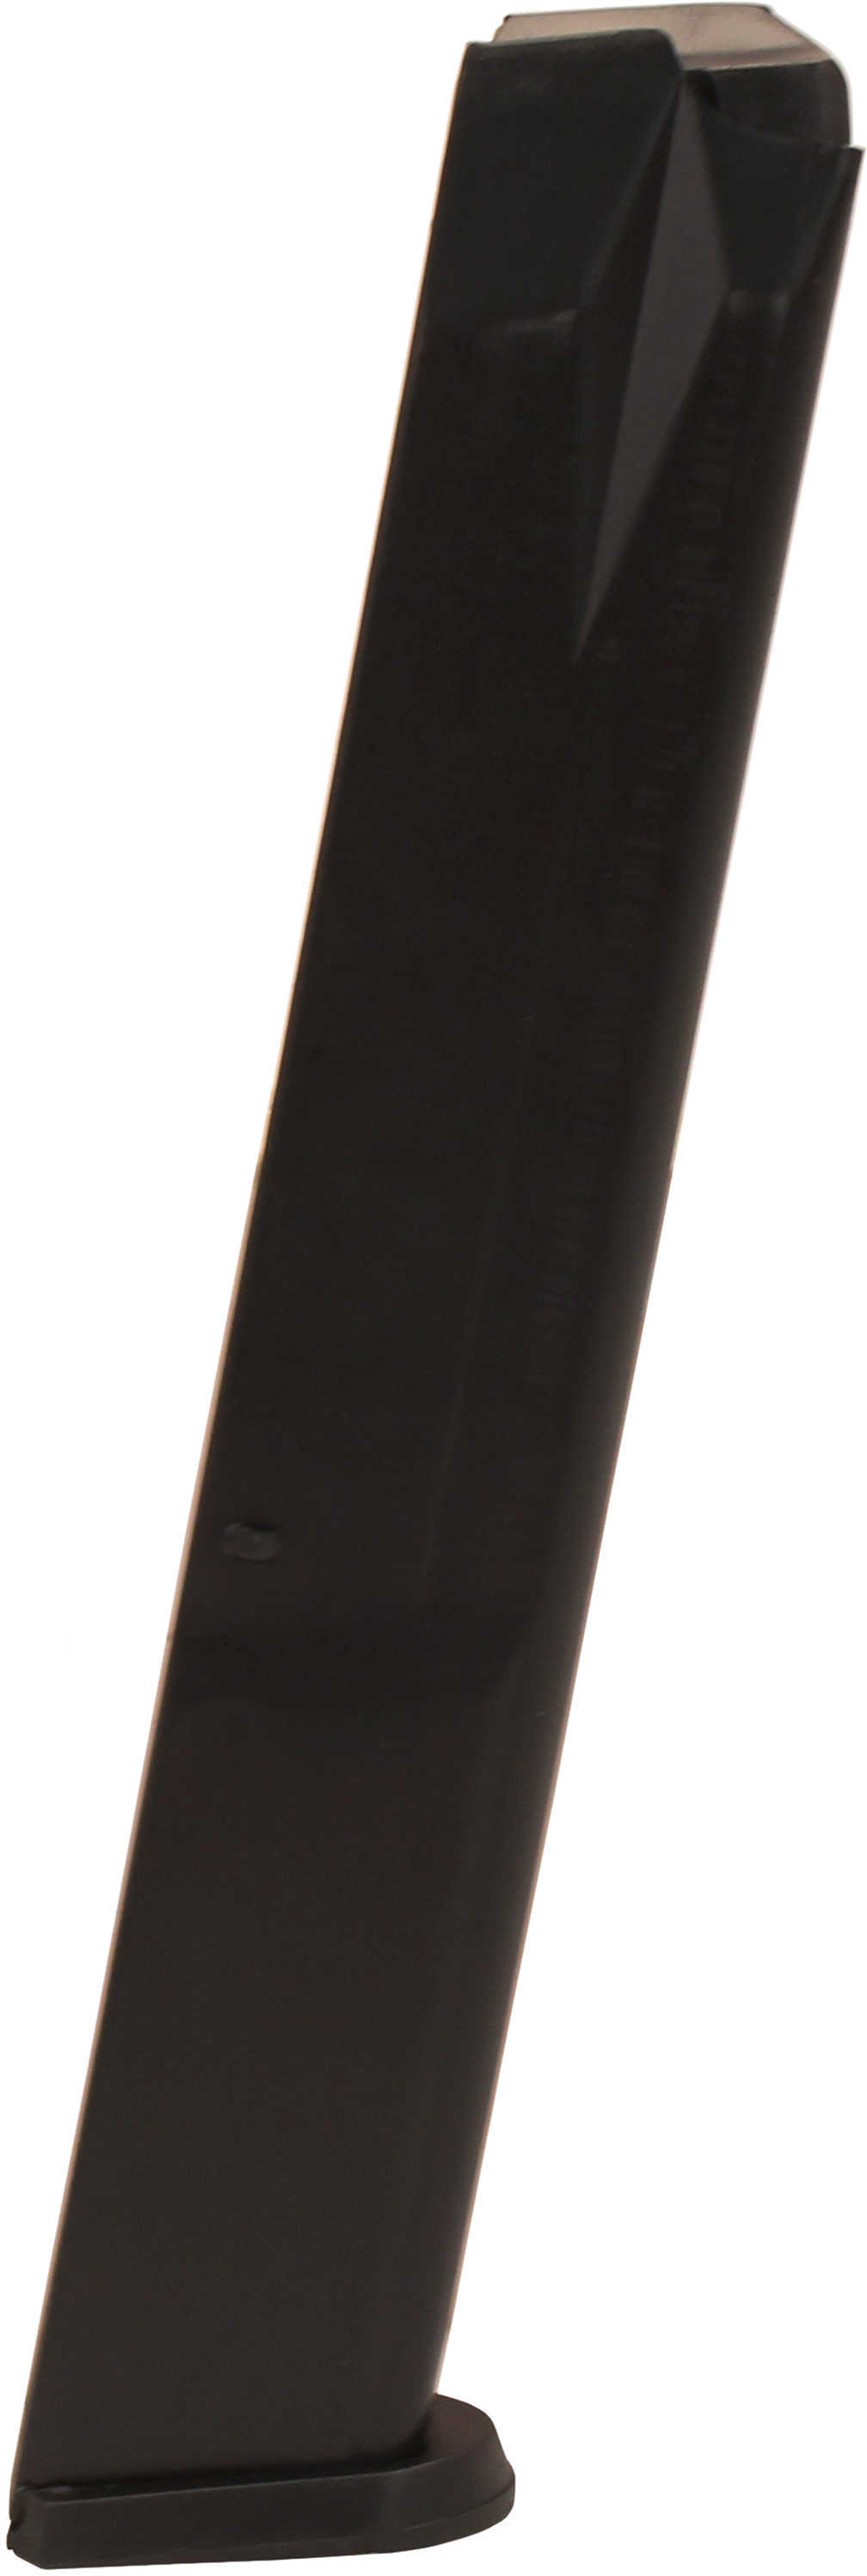 ProMag Ruger P94 High Capacity Magazine .40 S&W - 20 round - Blue Easy loading - RUGA8